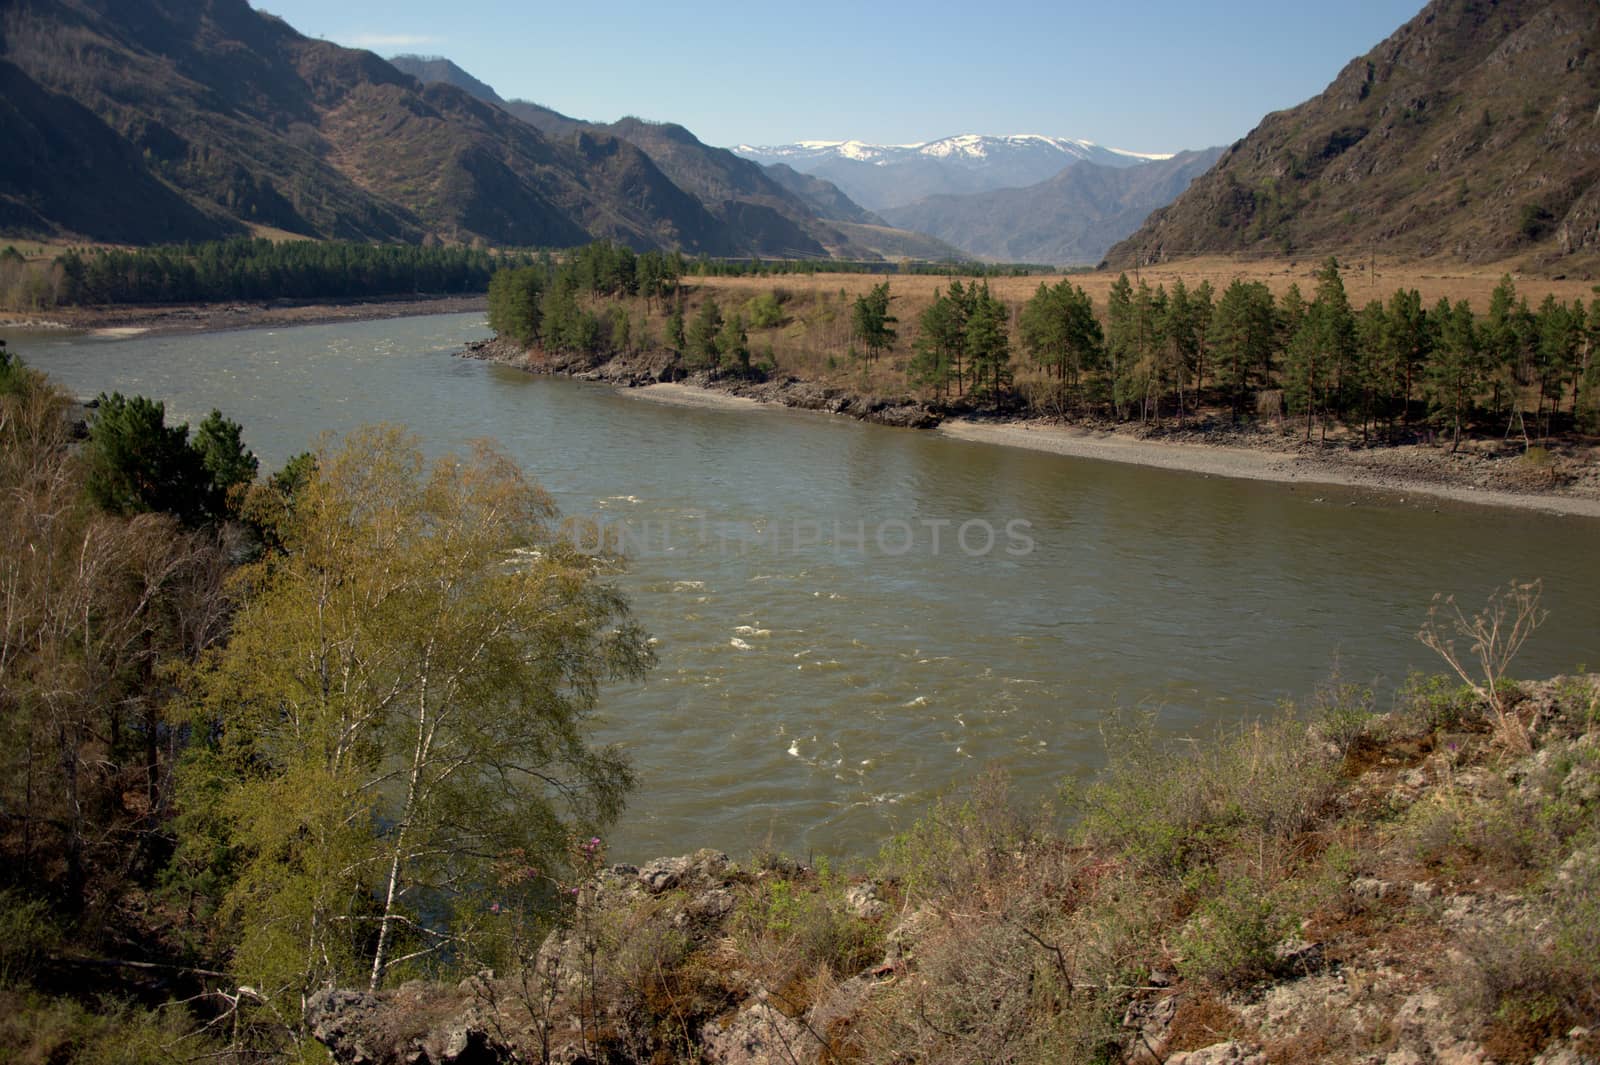 The swift Katun River carries its turquoise waters through the Altai Mountains.